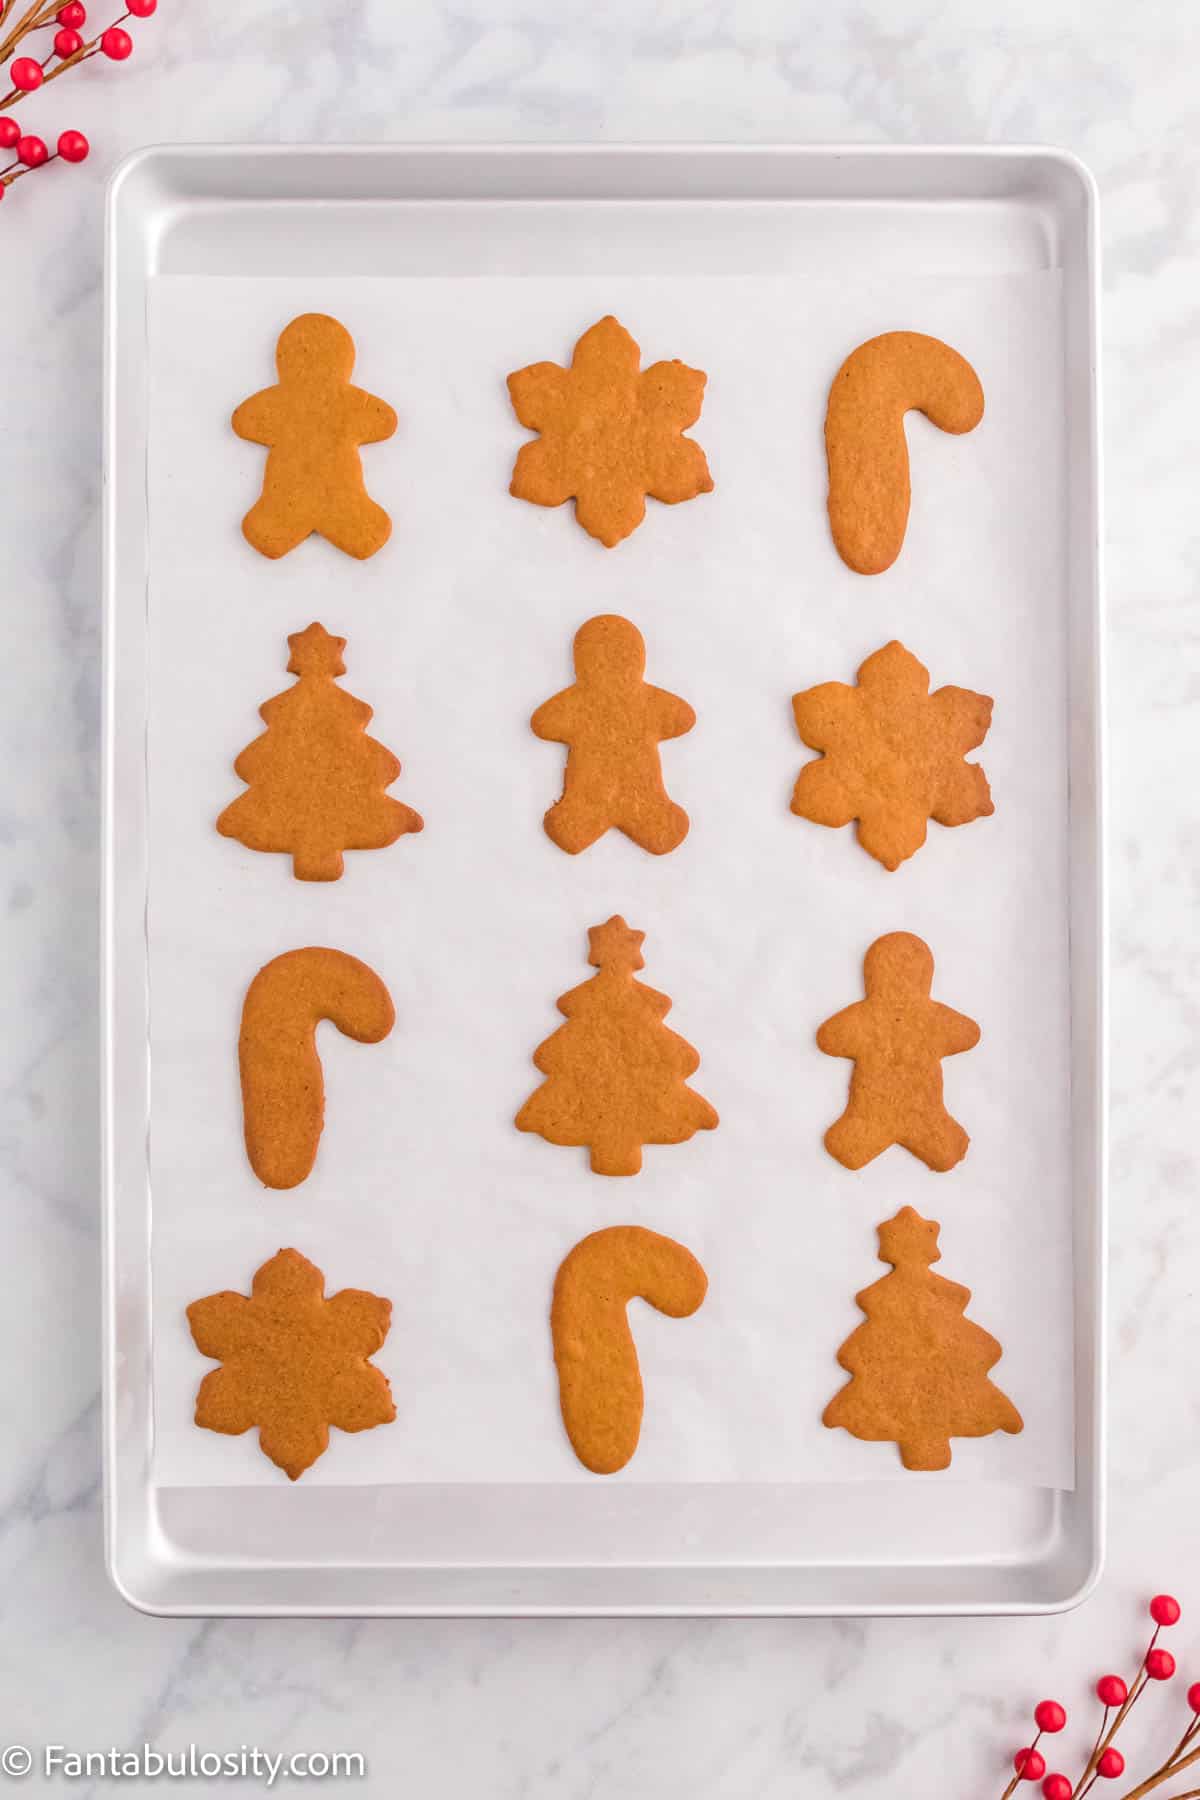 A metal baking sheet lined with parchment paper holds a dozen baked unfrosted gingerbread cookies